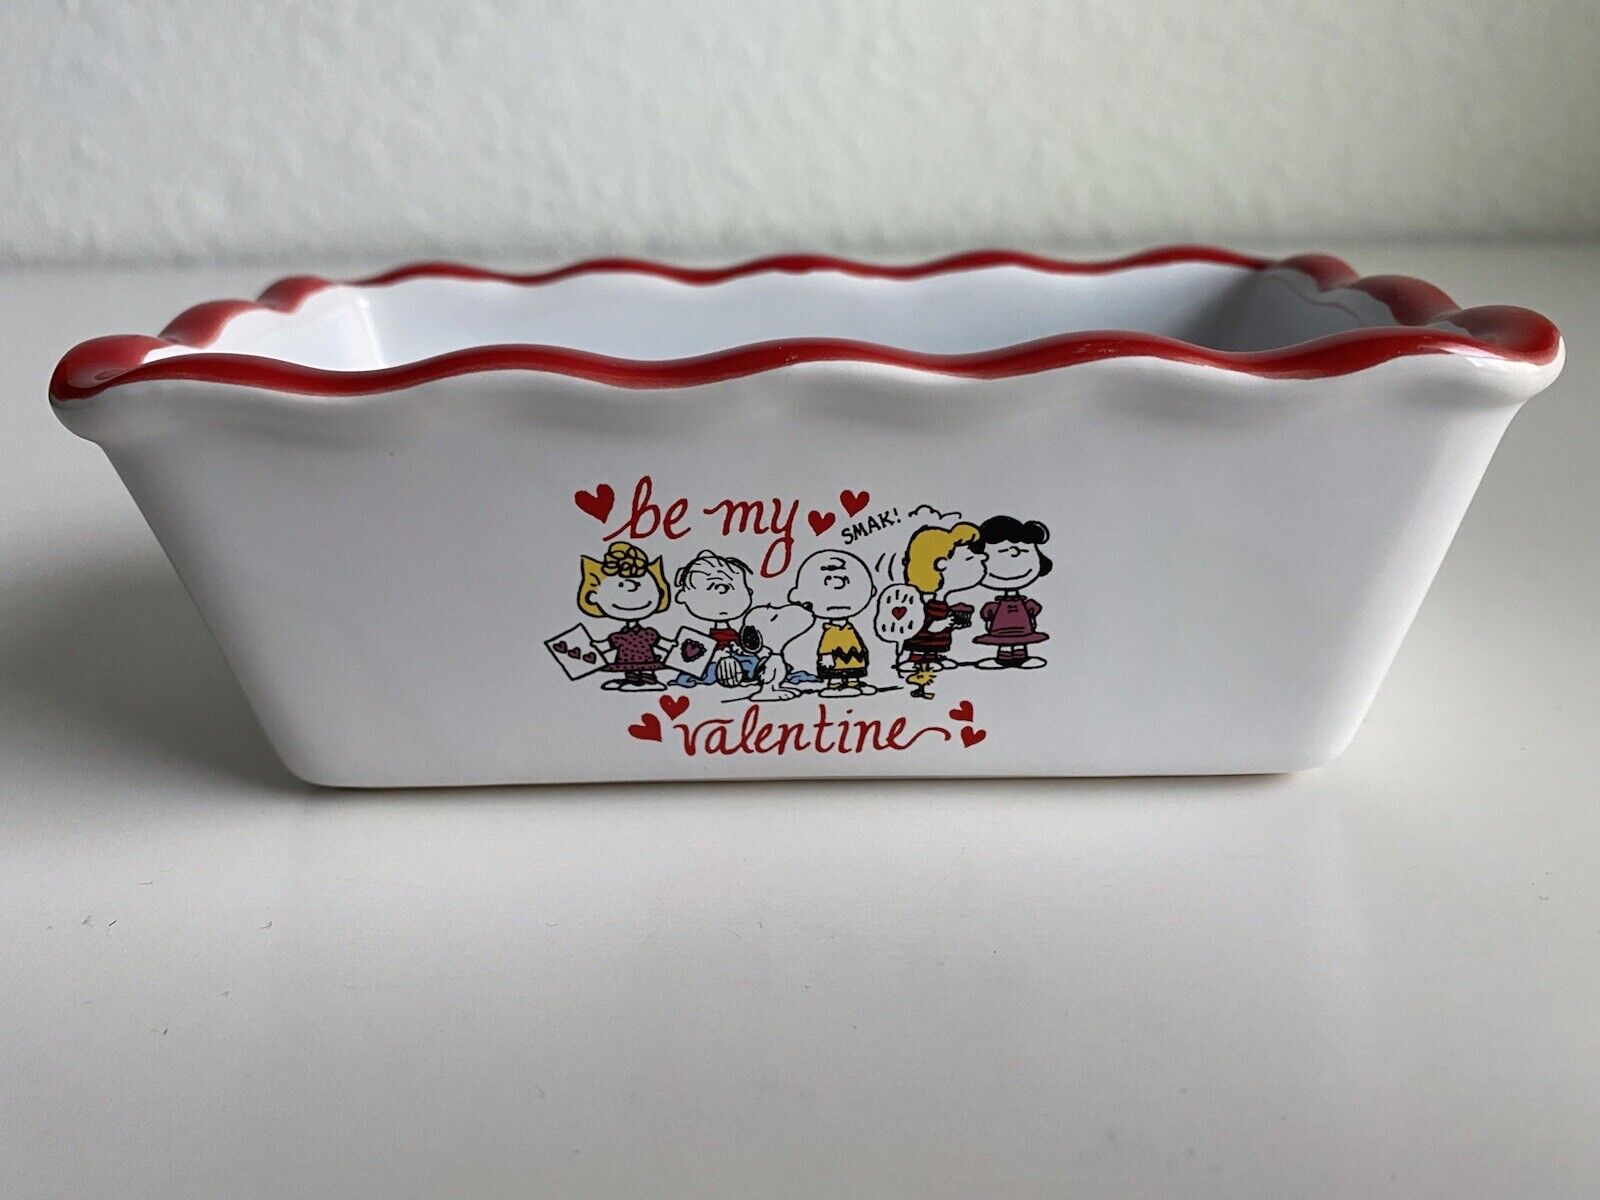 Peanuts Snoopy & Friends Valentine’s Mini Loaf Bread Baking Pan Dish Canister